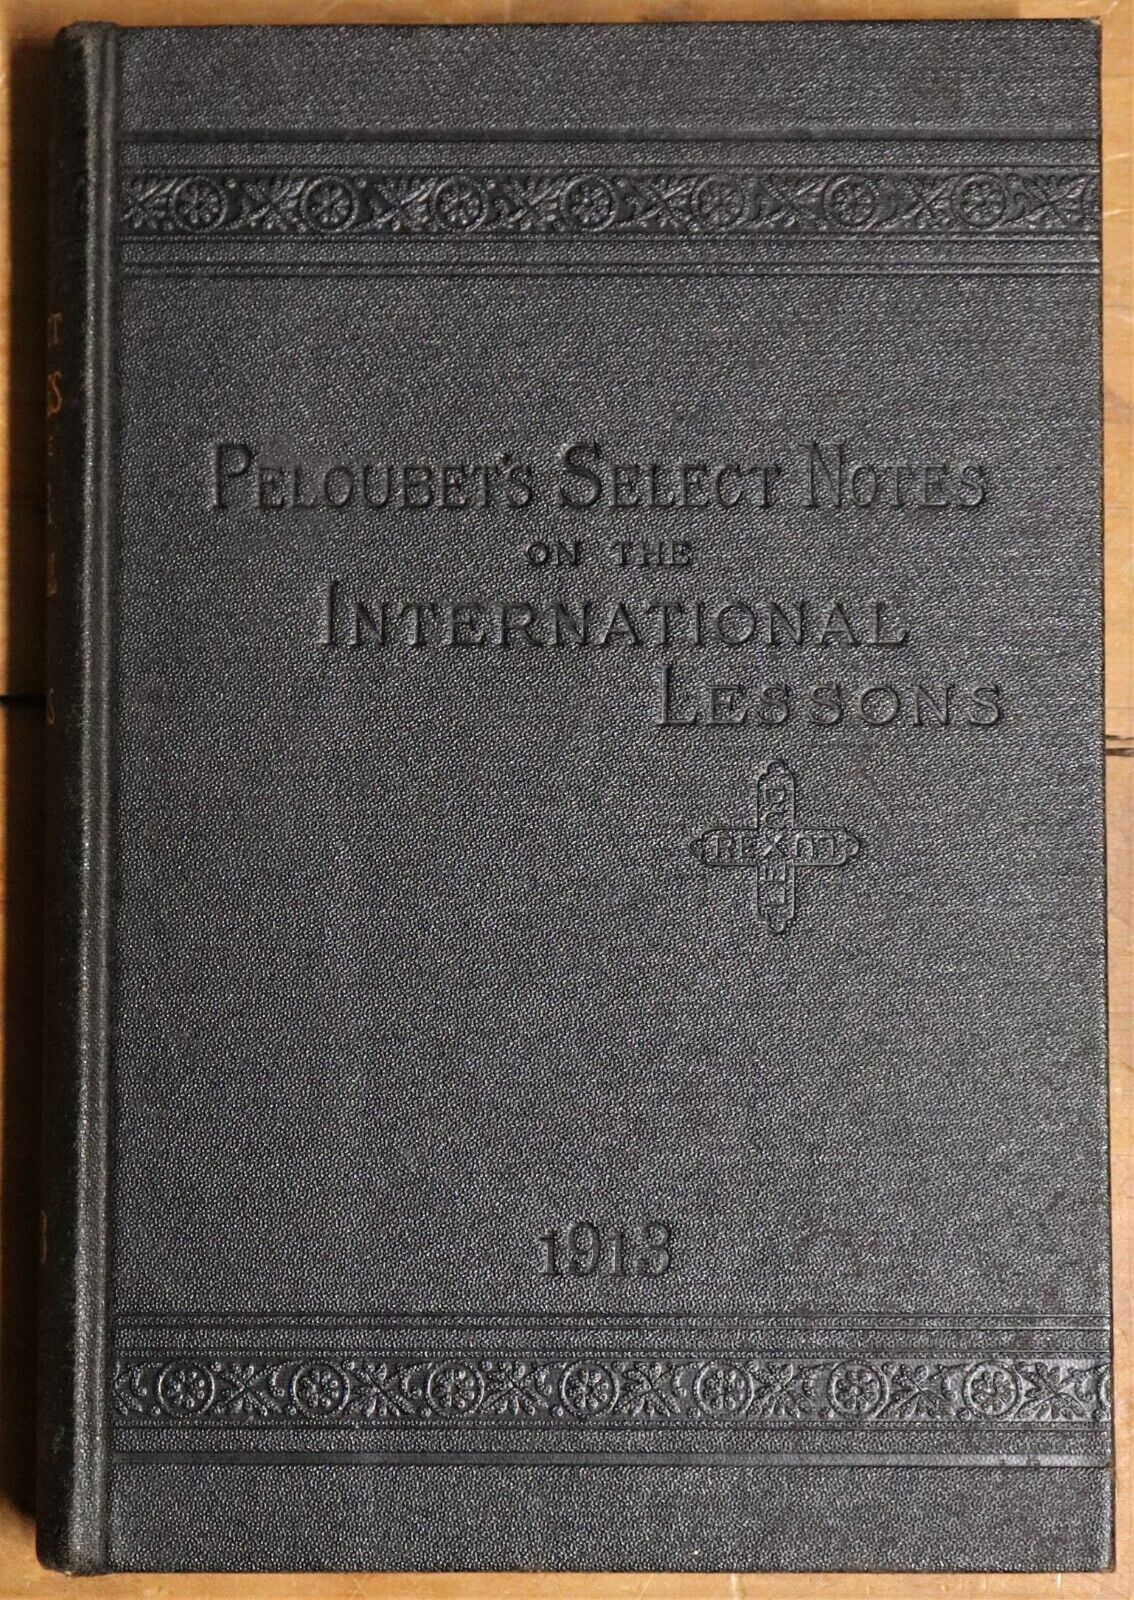 Peloubet's Select Notes On International Lessons - 1913 - Antique Religious Book - 0